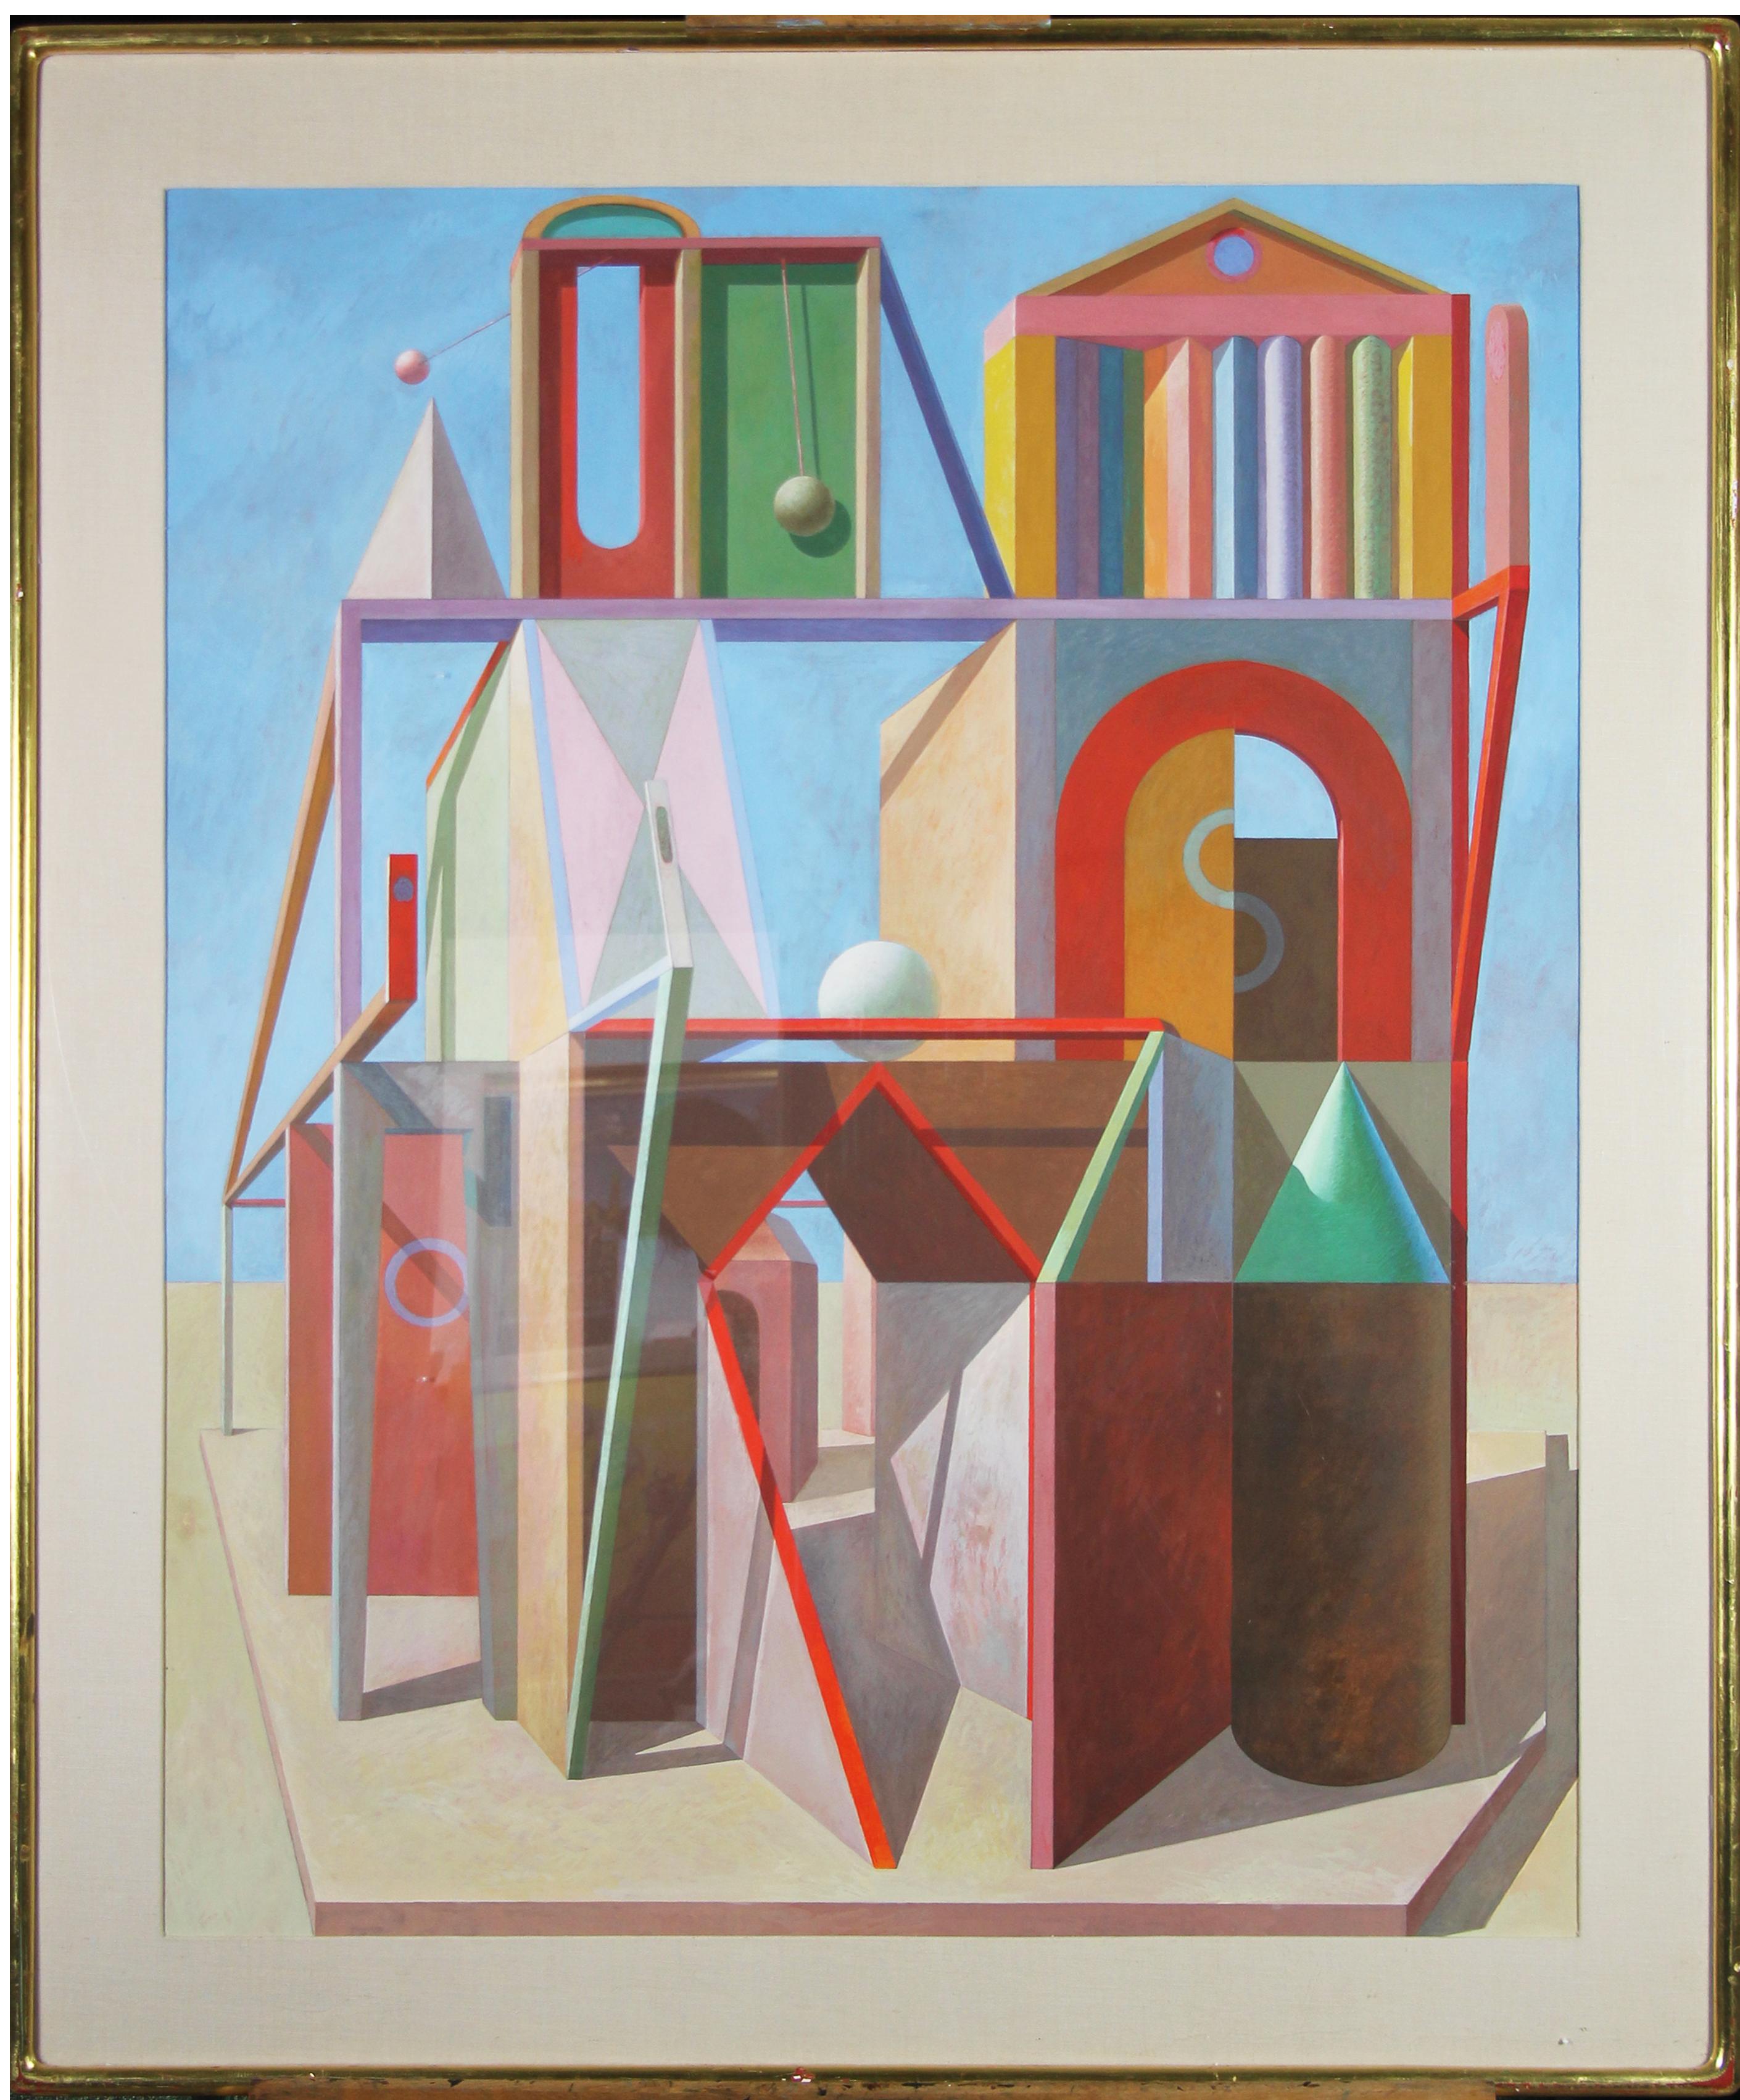 Architectural Fantasies, Geometric Abstract in Color - Painting by Joseph Amarotico